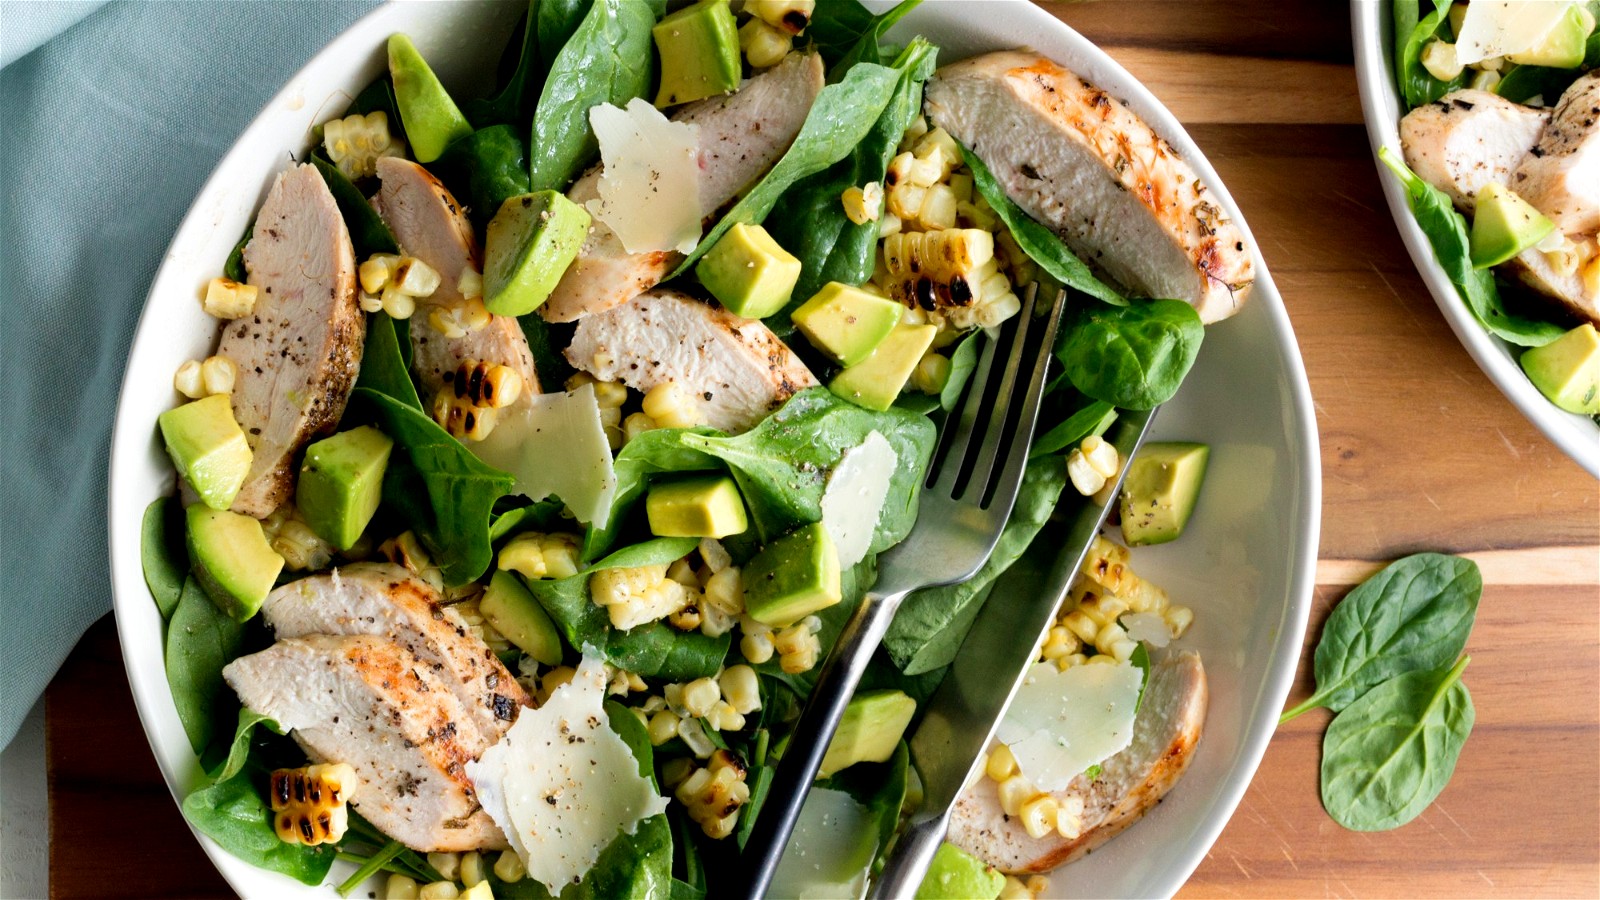 Image of Grilled Chicken and Corn Salad with Avocado